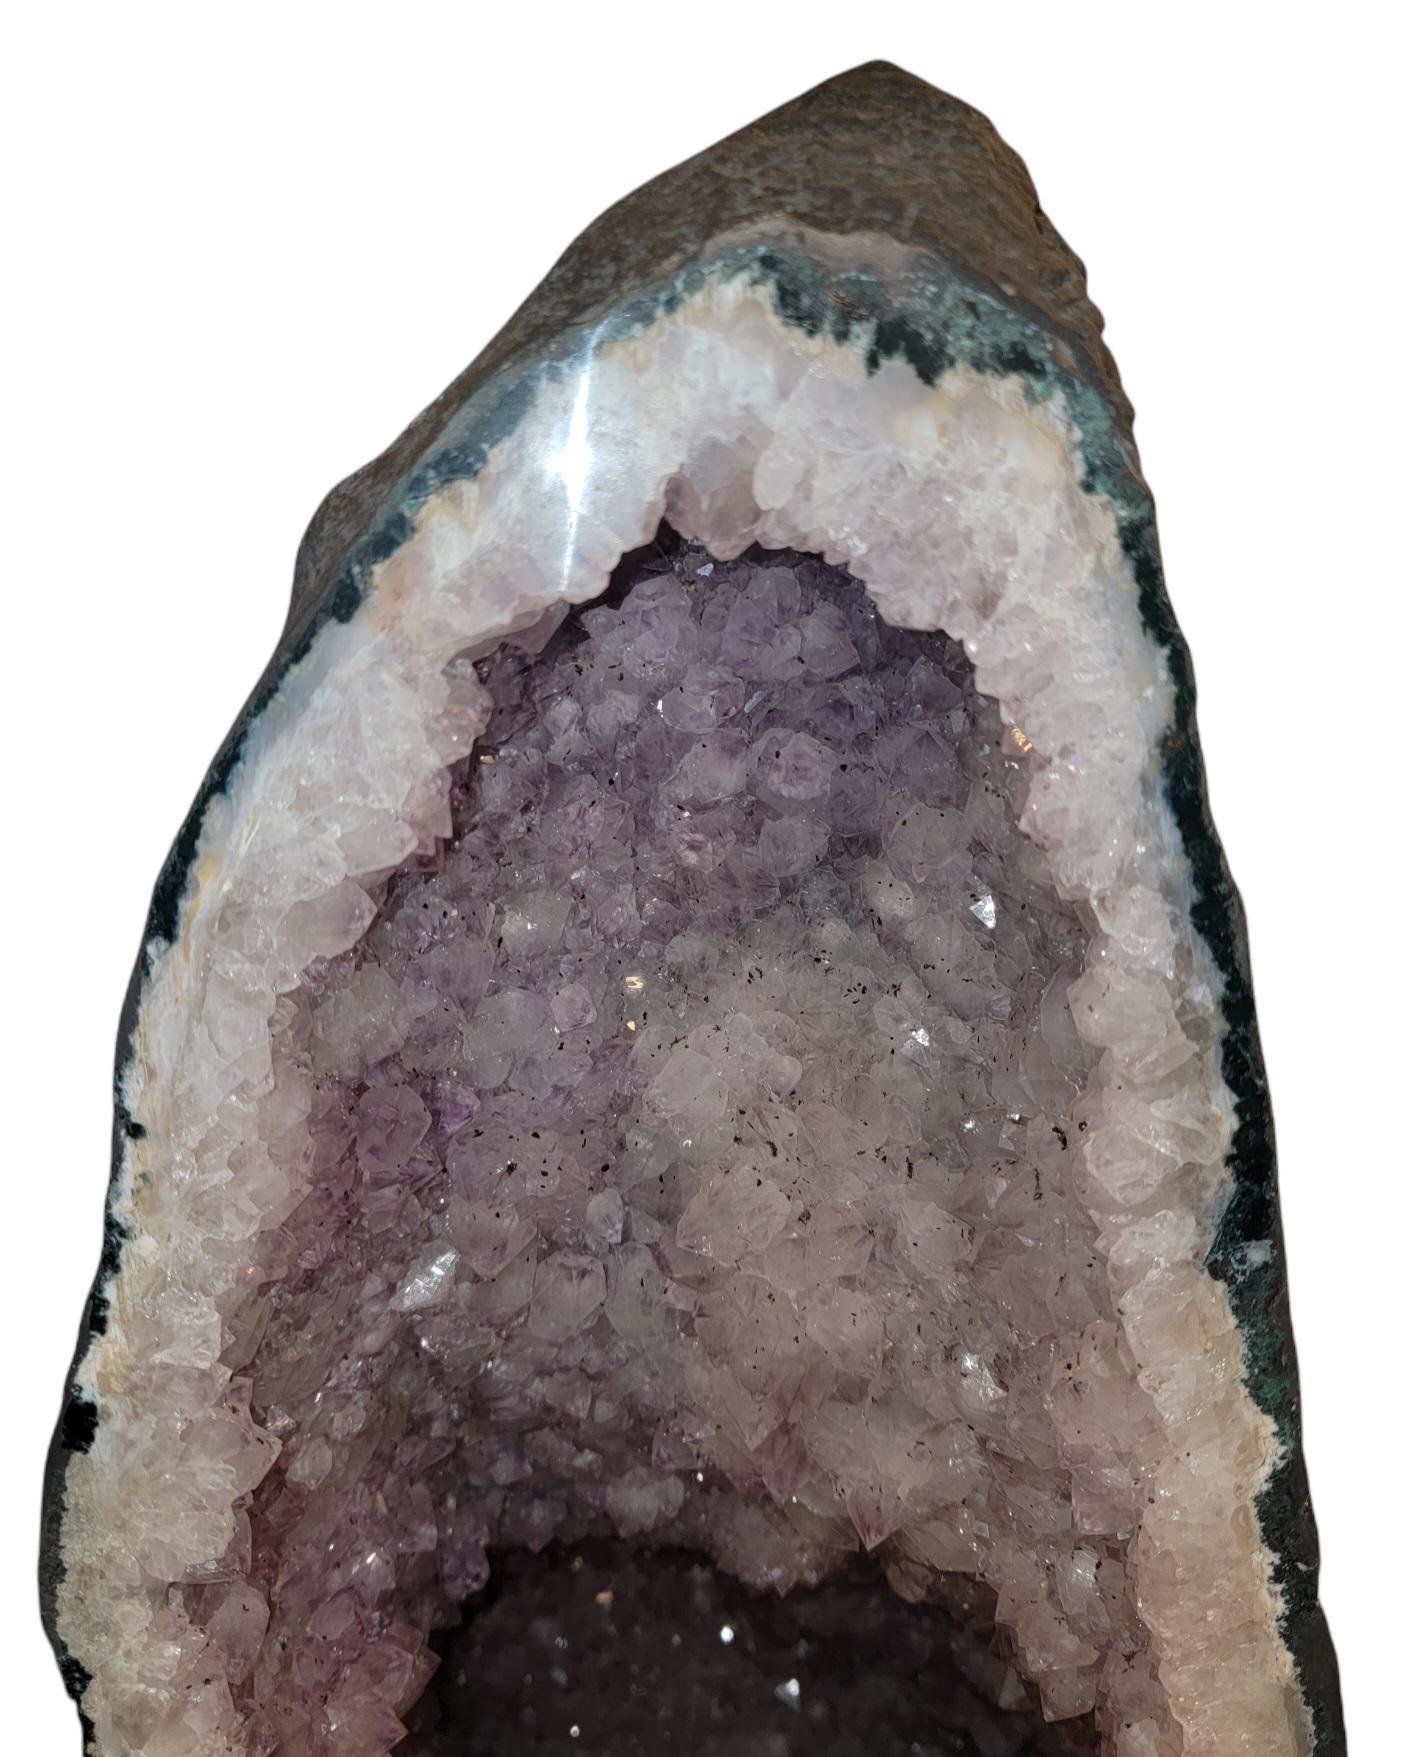 Brazilian Amethyst Quartz Cathedral Geode. This item is a standalone item. The Geode needs no support. This item has beautiful amethyst crystals within the crusted frame.


9.5 x 10.5 x 27.